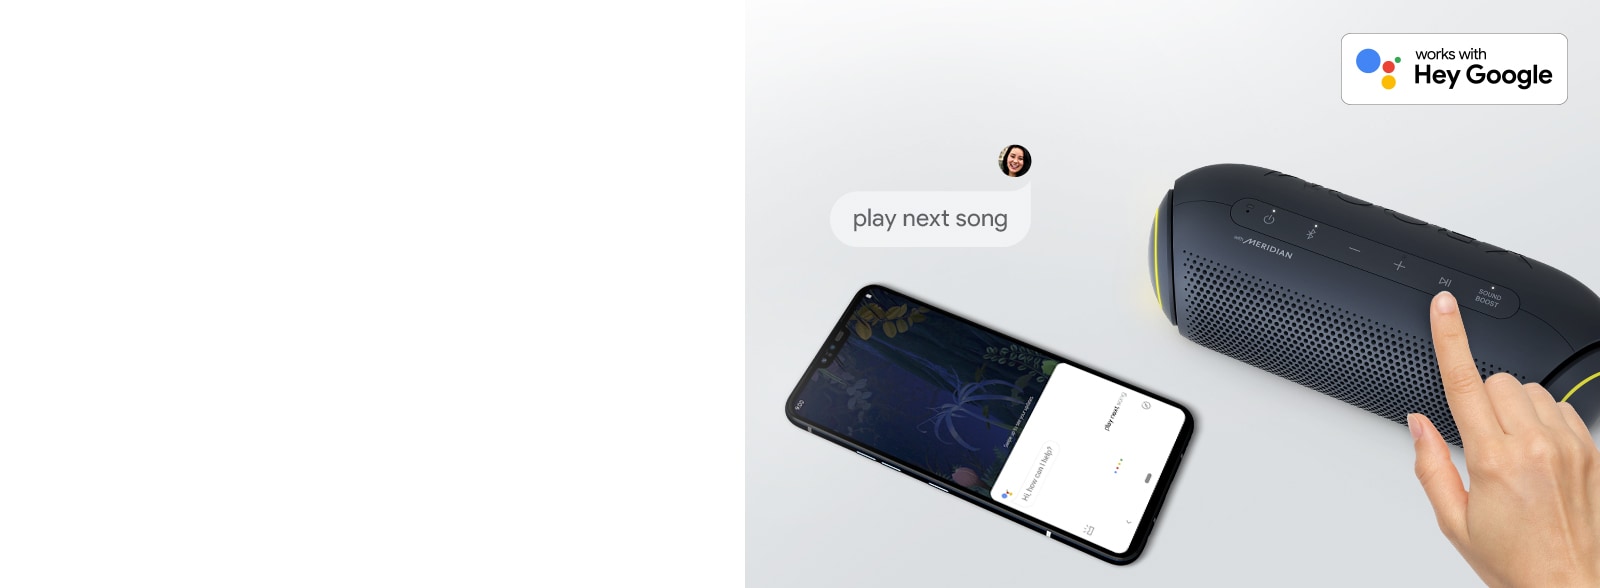 A hand presses a button on LG XBOOM Go. A smartphone is next it. There